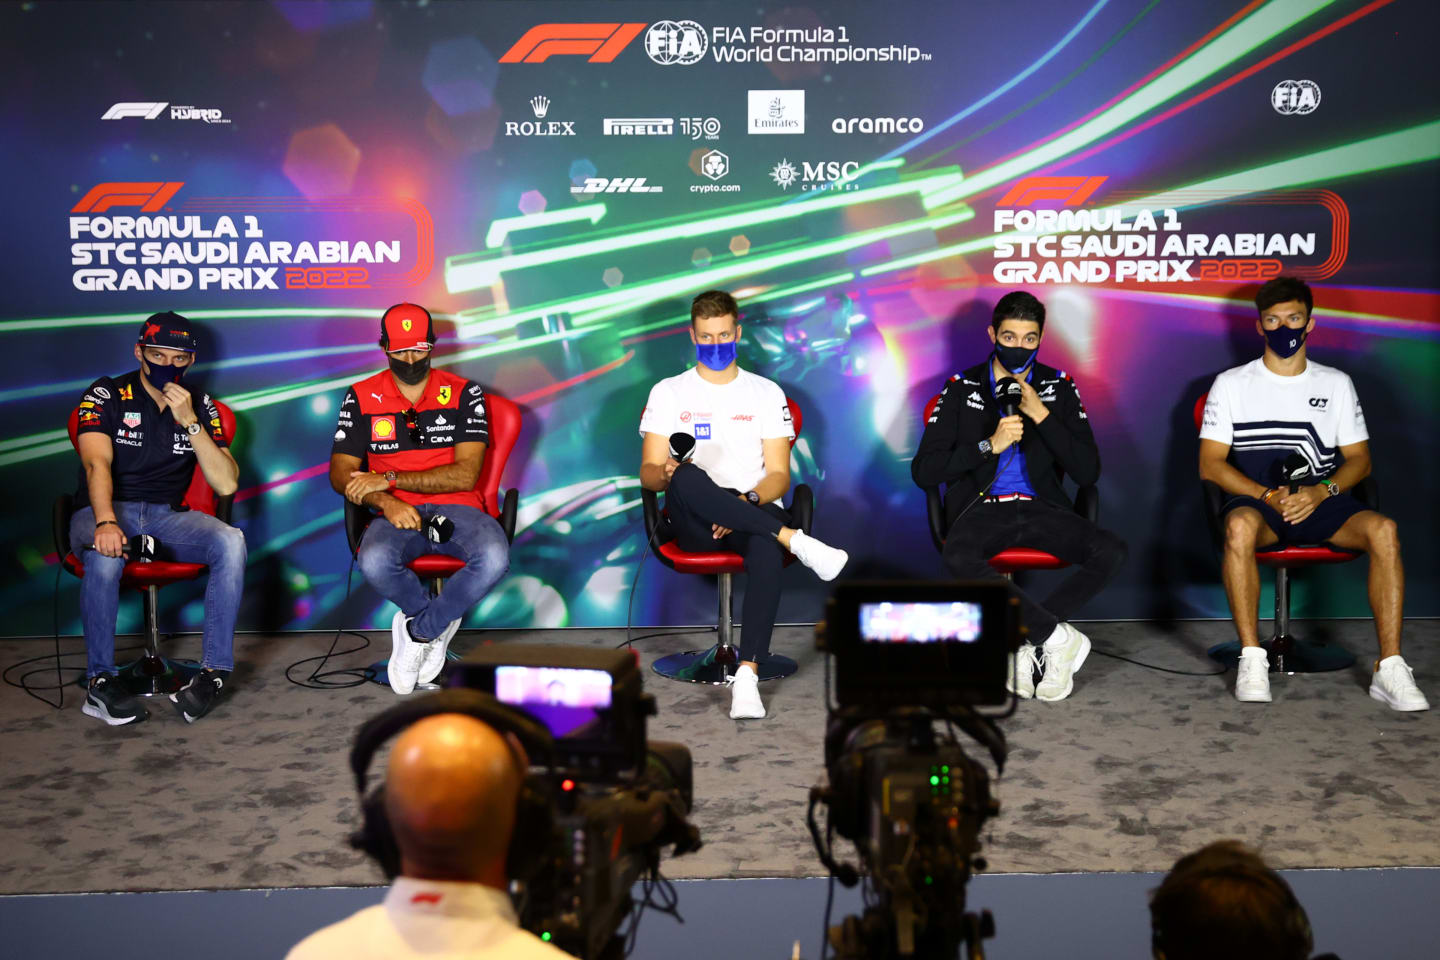 JEDDAH, SAUDI ARABIA - MARCH 25: (L-R) Max Verstappen of the Netherlands and Oracle Red Bull Racing, Carlos Sainz of Spain and Ferrari, Mick Schumacher of Germany and Haas F1, Esteban Ocon of France and Alpine F1 and Pierre Gasly of France and Scuderia AlphaTauri attend the Drivers Press Conference before practice ahead of the F1 Grand Prix of Saudi Arabia at the Jeddah Corniche Circuit on March 25, 2022 in Jeddah, Saudi Arabia. (Photo by Dan Istitene - Formula 1/Formula 1 via Getty Images)